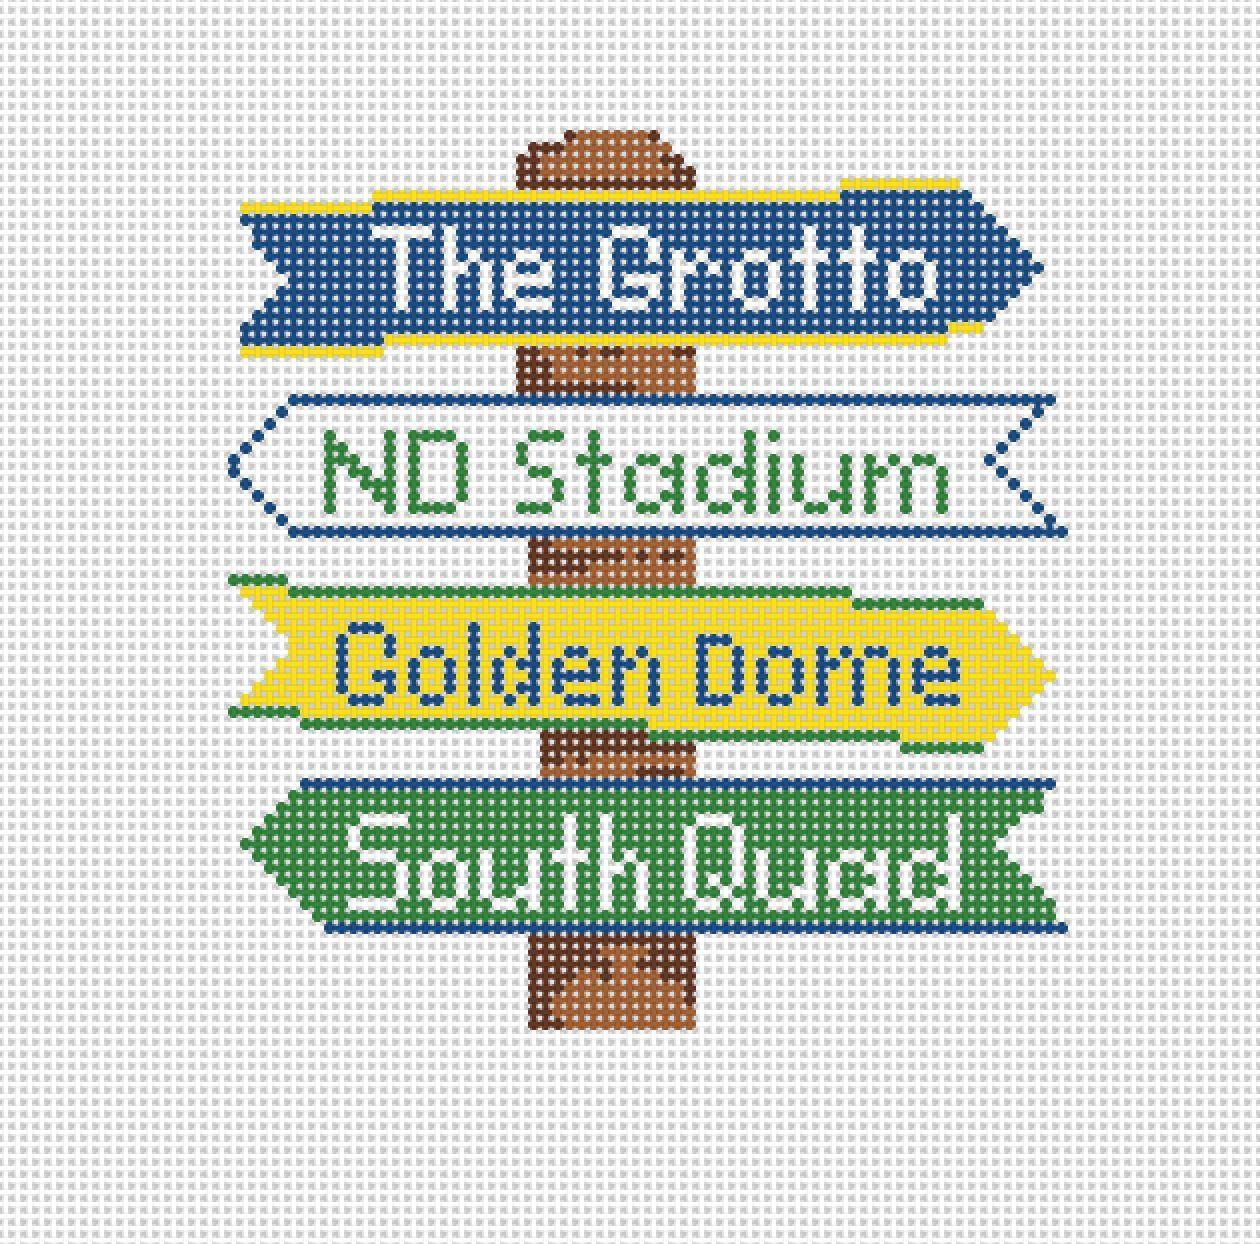 Notre Dame College Icon Destination Sign - Needlepoint by Laura